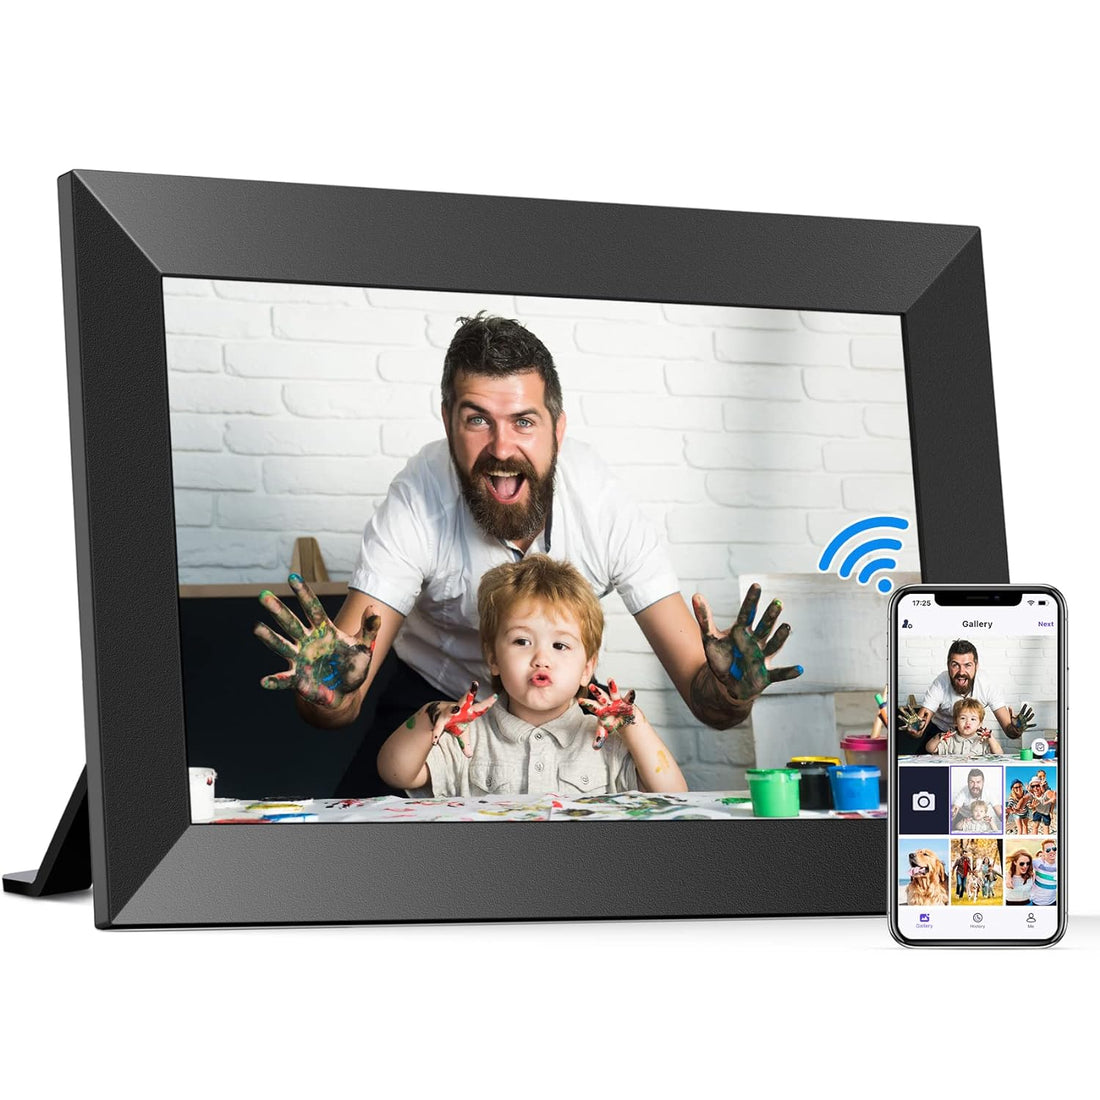 BIGASUO 10.1 Inch WiFi Digital Picture Frame, IPS HD Touch Screen Cloud Smart Photo Frames with Built-in 16GB Memory, Wall Mountable, Auto-Rotate, Share Photos Instantly from Anywhere-Great Gift